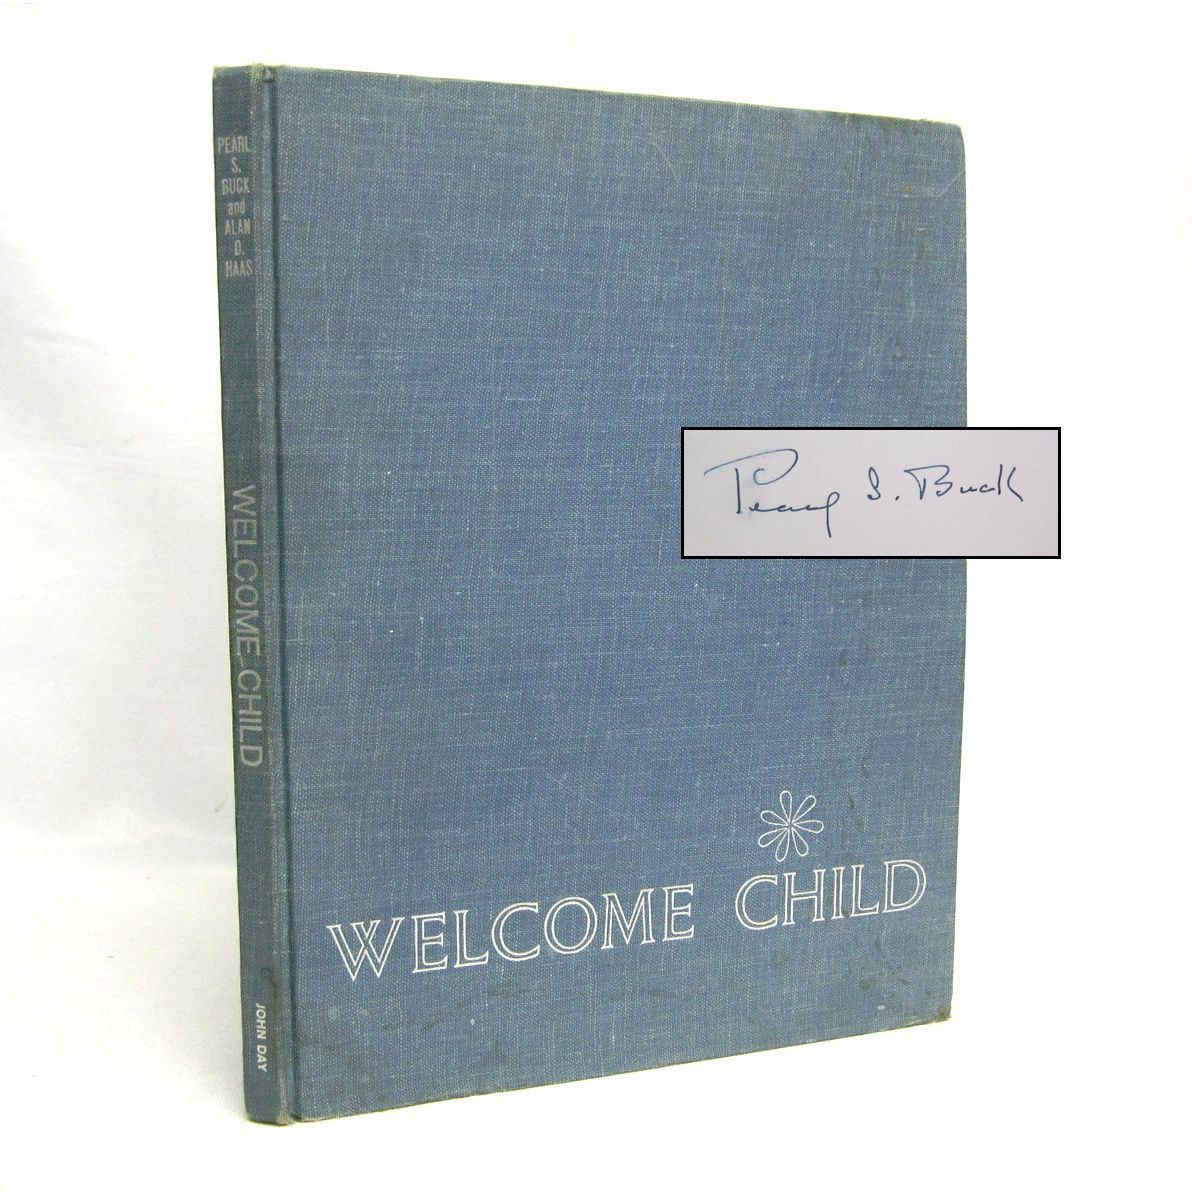 Welcome Child by Pearl S. Buck